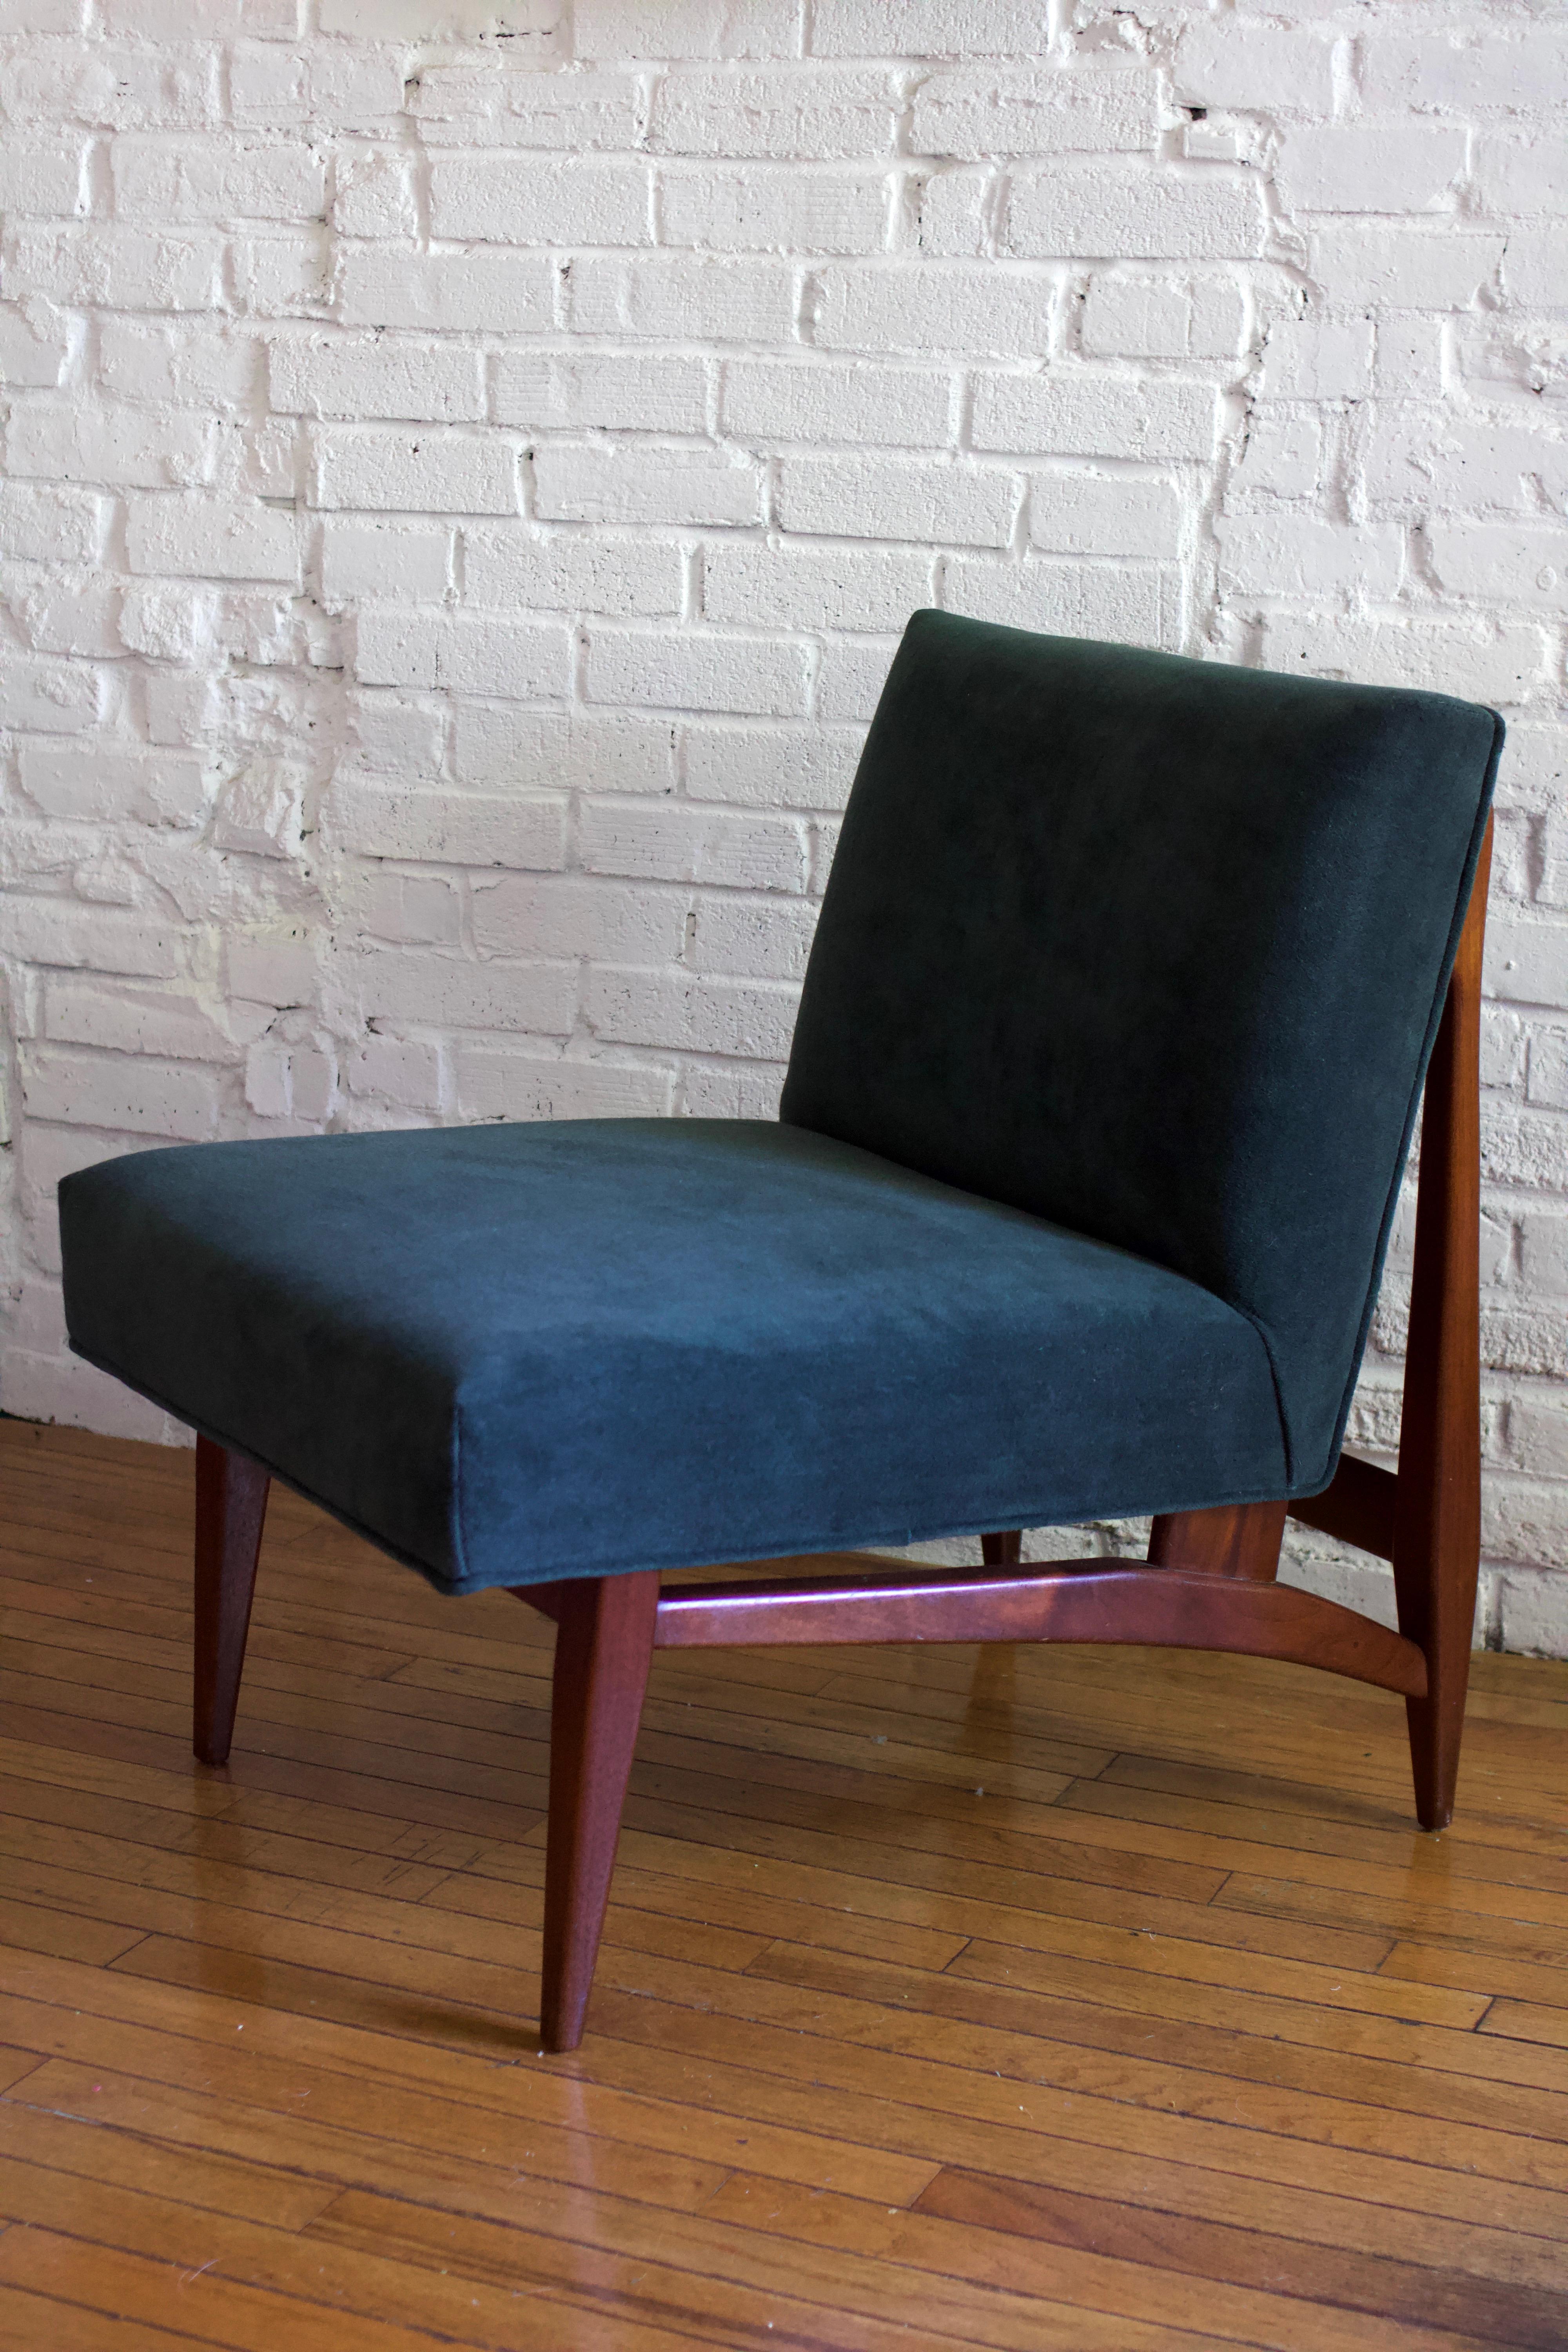 Stunning 1960's Danish armless slipper chair. Thoughtfully reupholstered with supple green mohair velvet. Oak frame was recently restored as well. The chair's elegantly sculpted legs and back frame along with its rich, wood tone make this chair